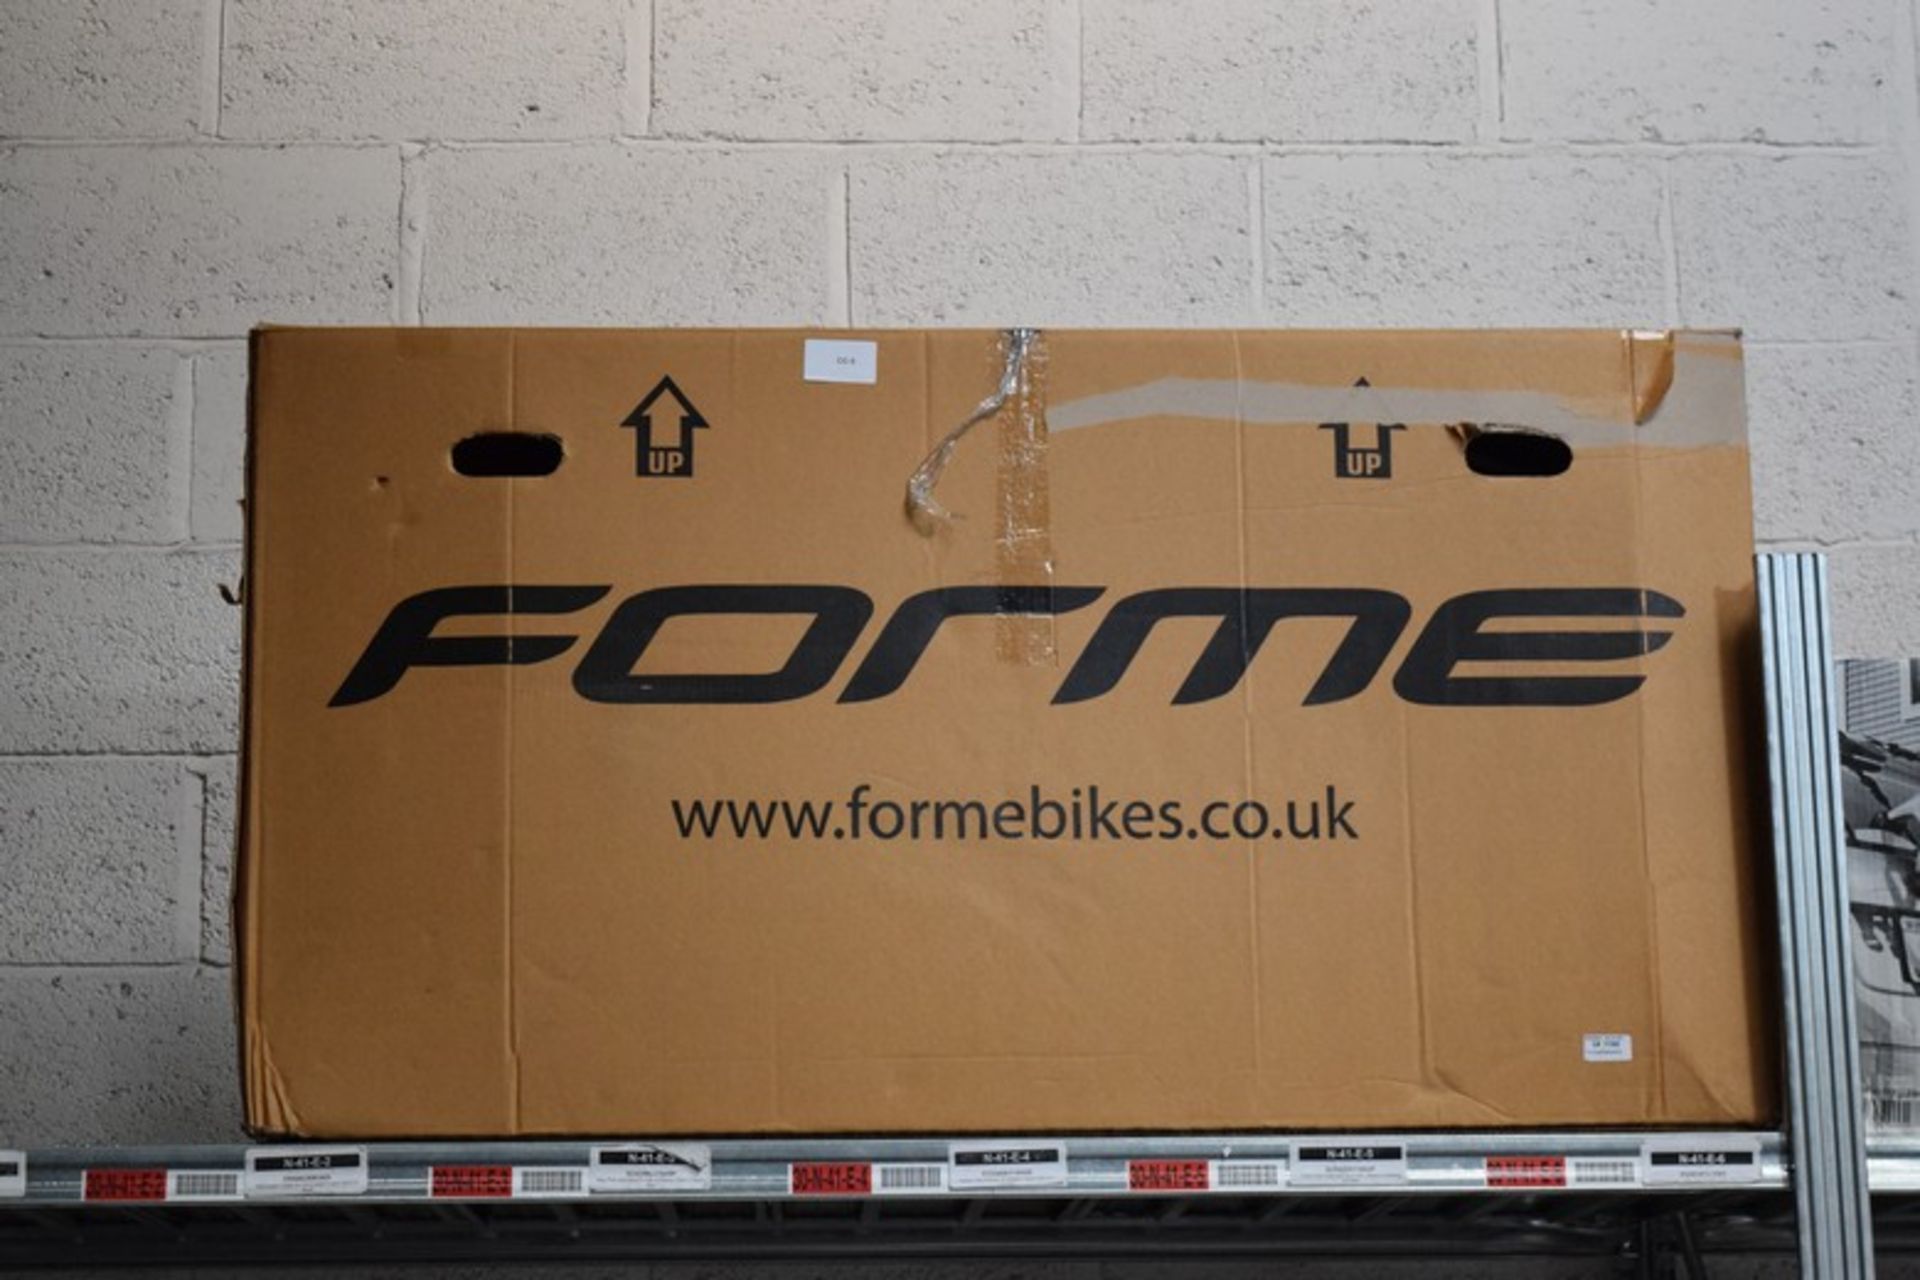 1 X BRAND NEW FORM 4 RED RACER BIKE RRP £600.00